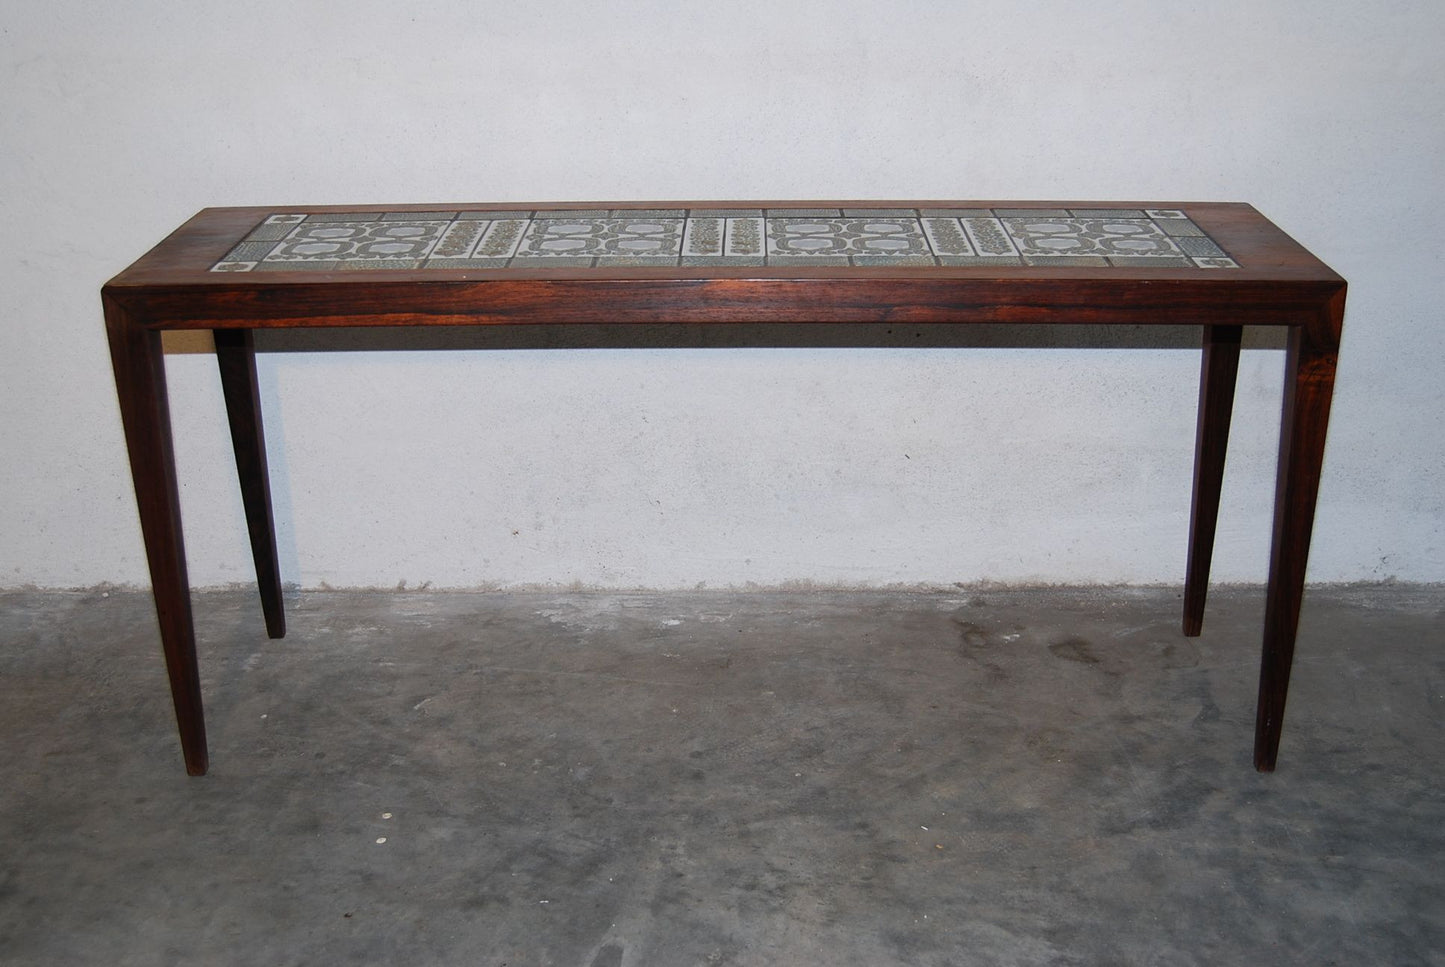 Occasional Table with Ceramic Inlay